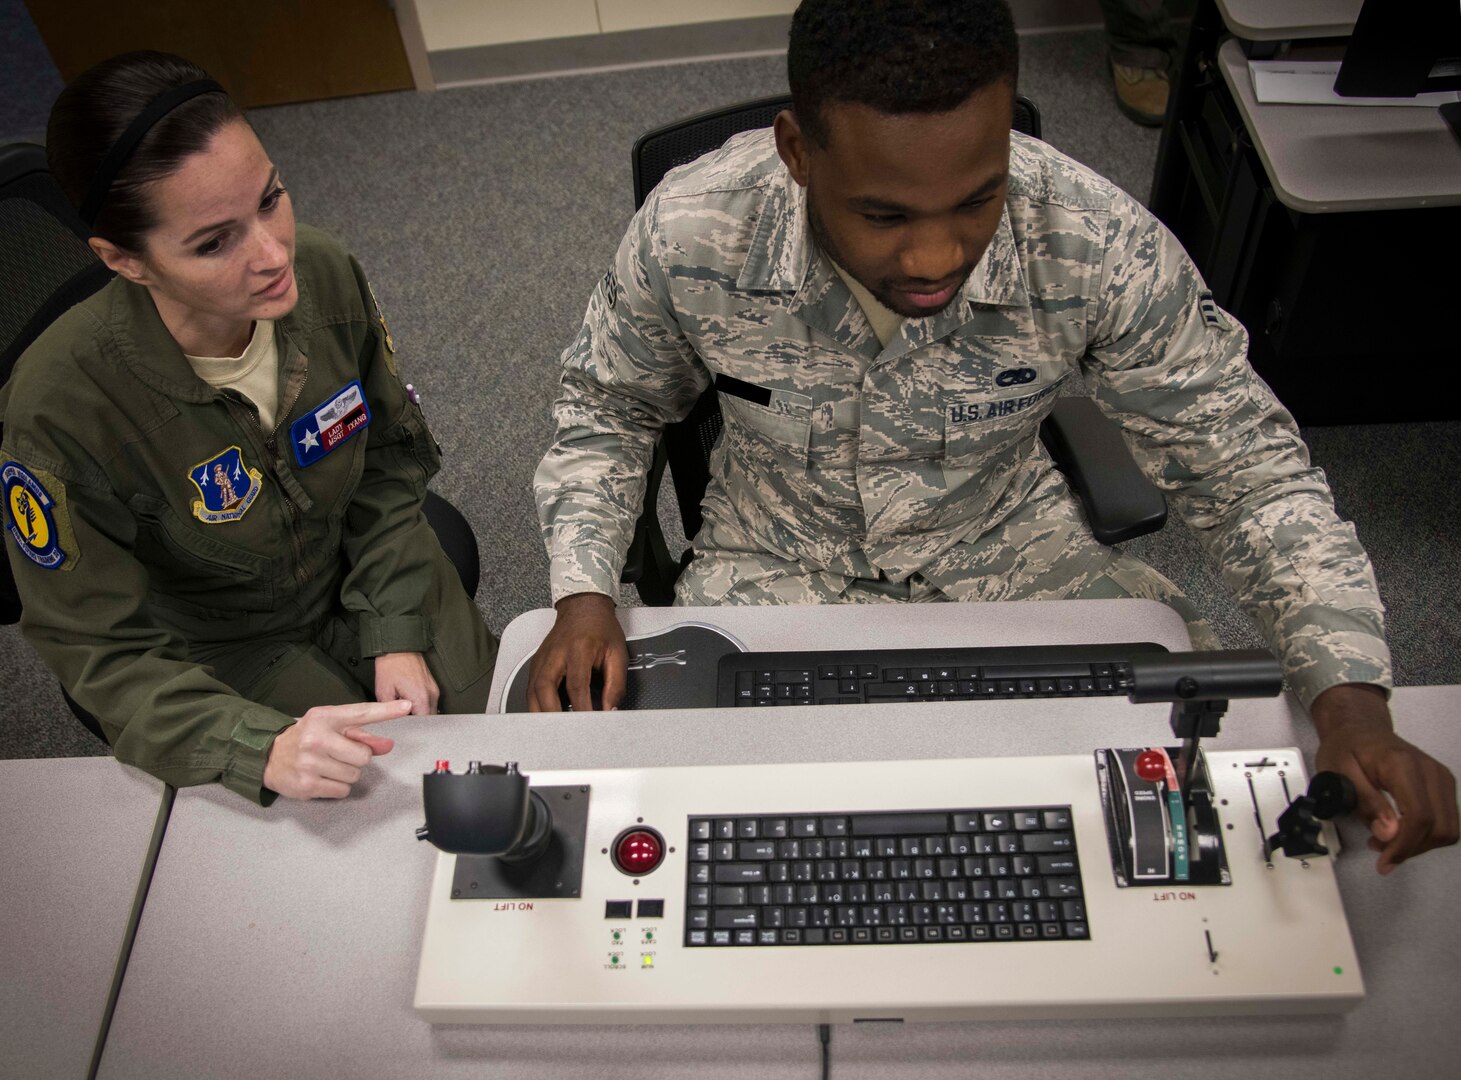 An instructor sits next to a student at a tabletop simulator to help guide him with proper procedures. This simulator is specifically to help train sensor operators. It has a keyboard and three levers.